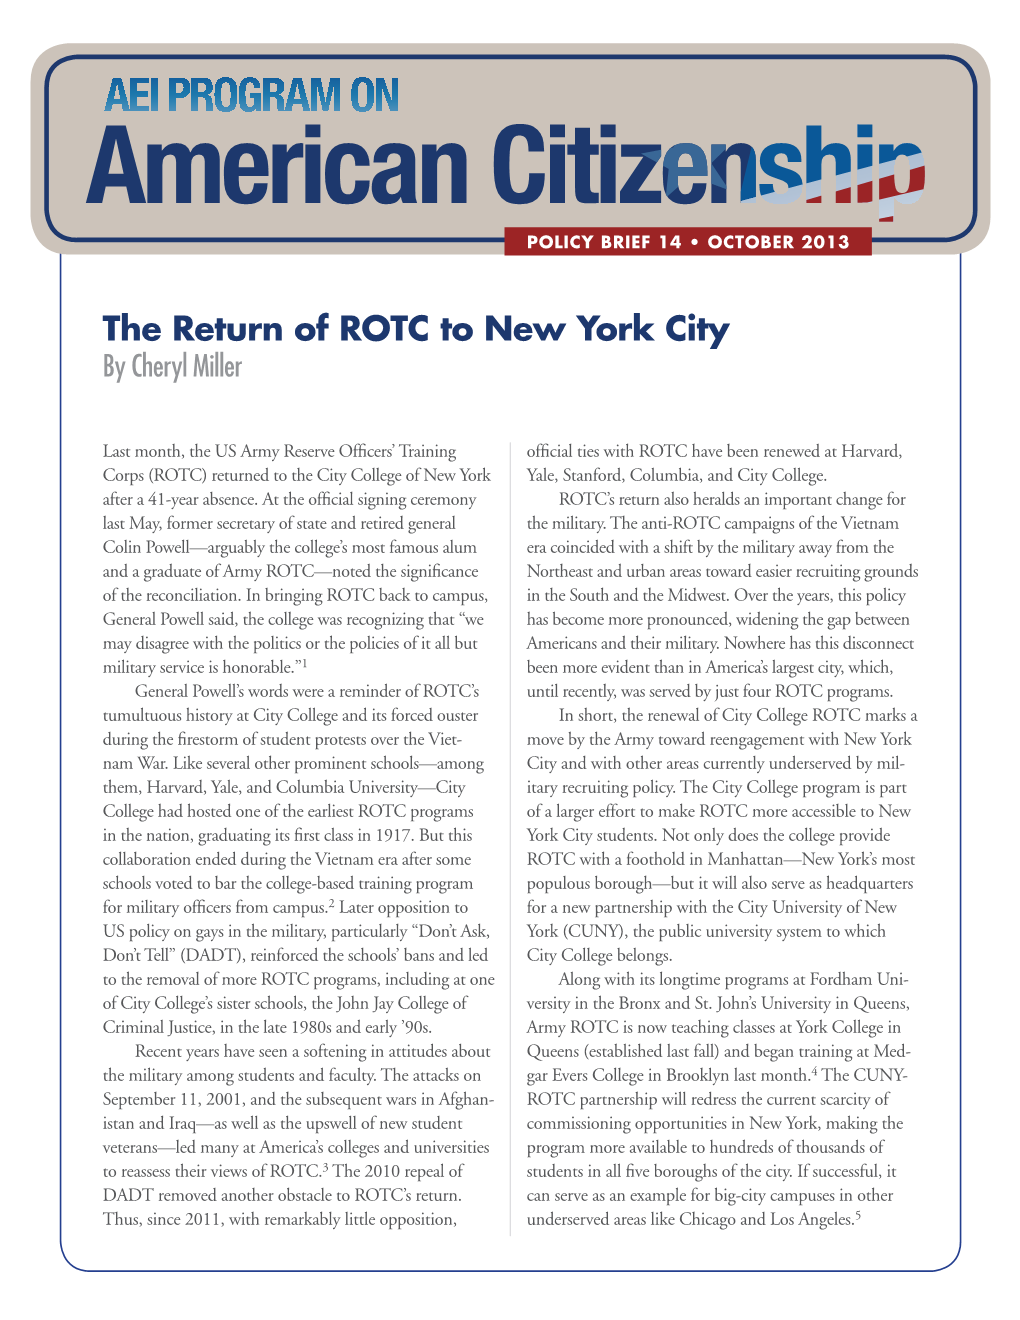 The Return of ROTC to New York City by Cheryl Miller